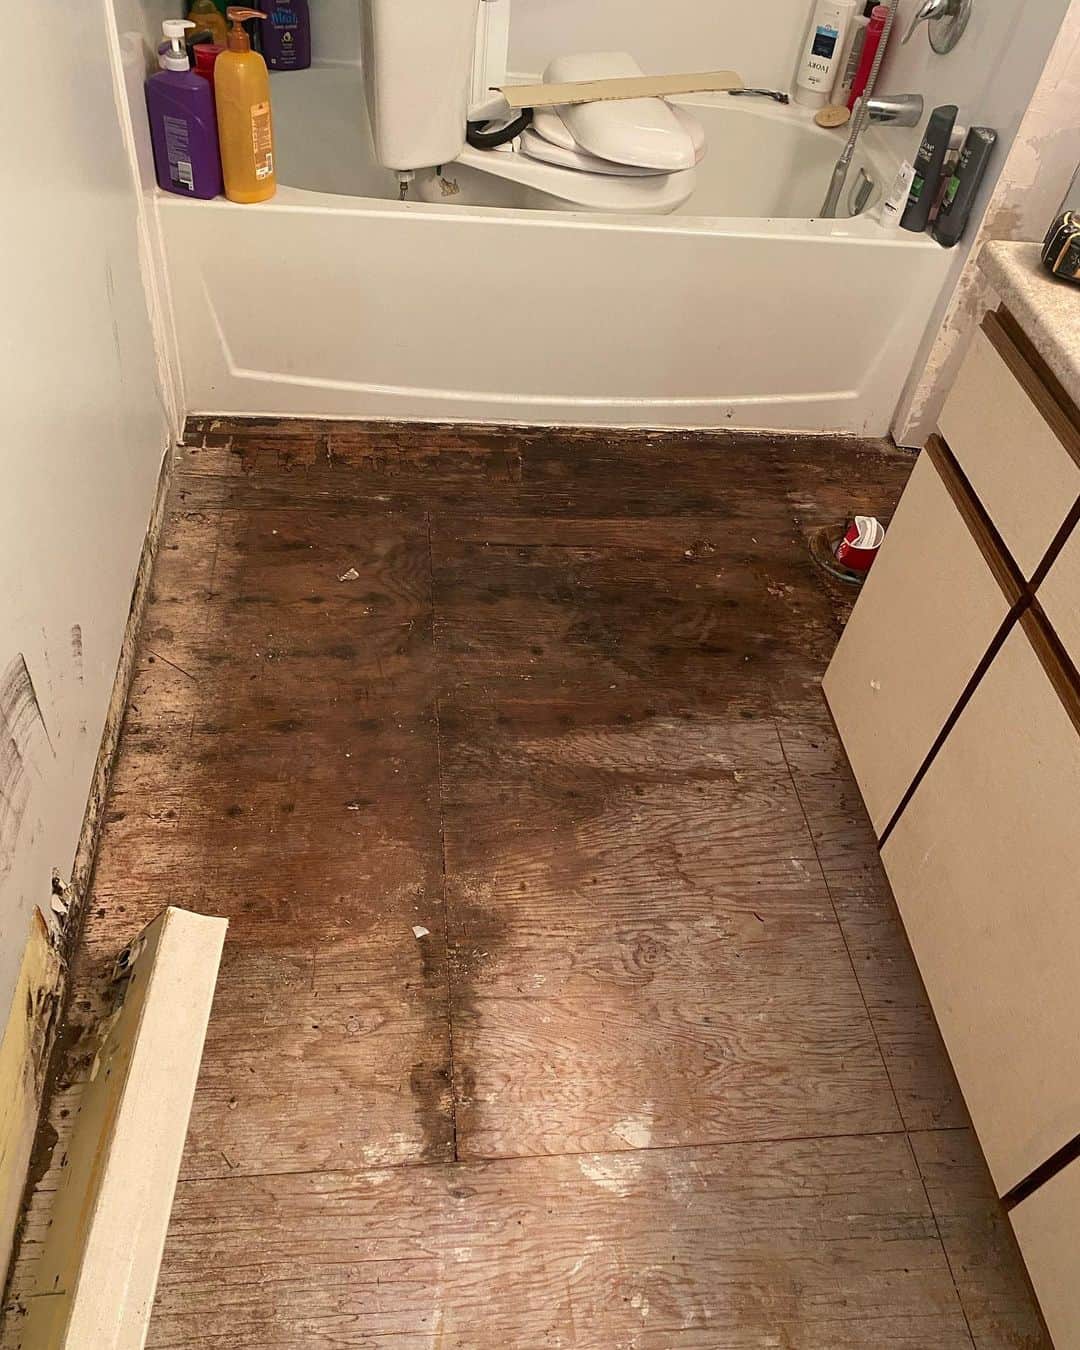 Allow to dry, and set new flooring